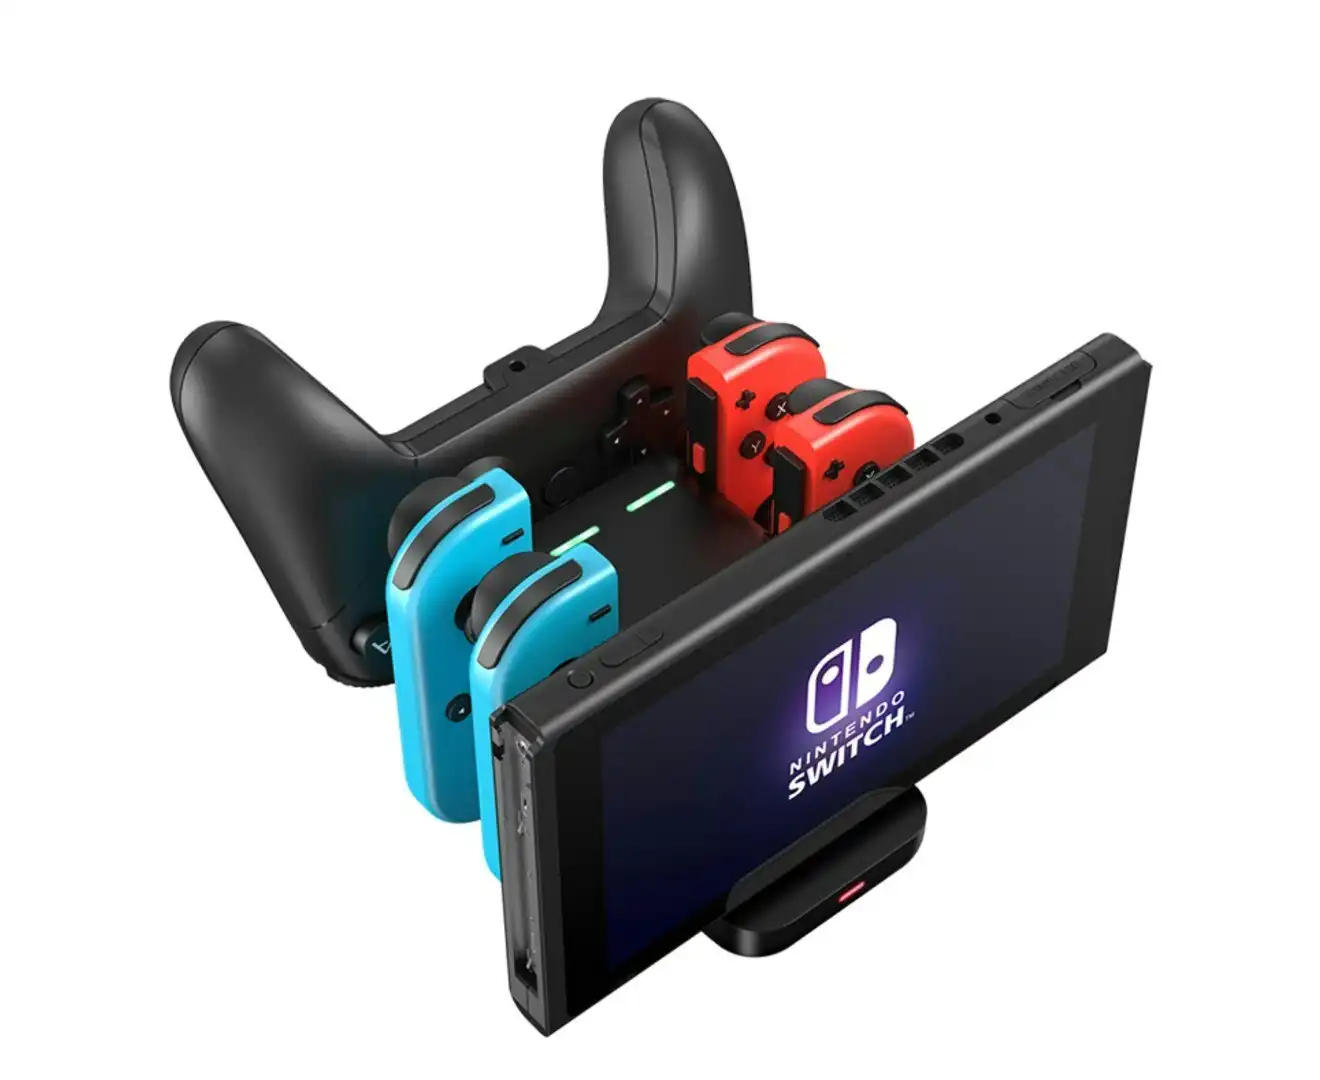 6-in-1 Nintendo Switch Multi Charging Dock Station for Joy-Con, Pro Controller & Console, Black